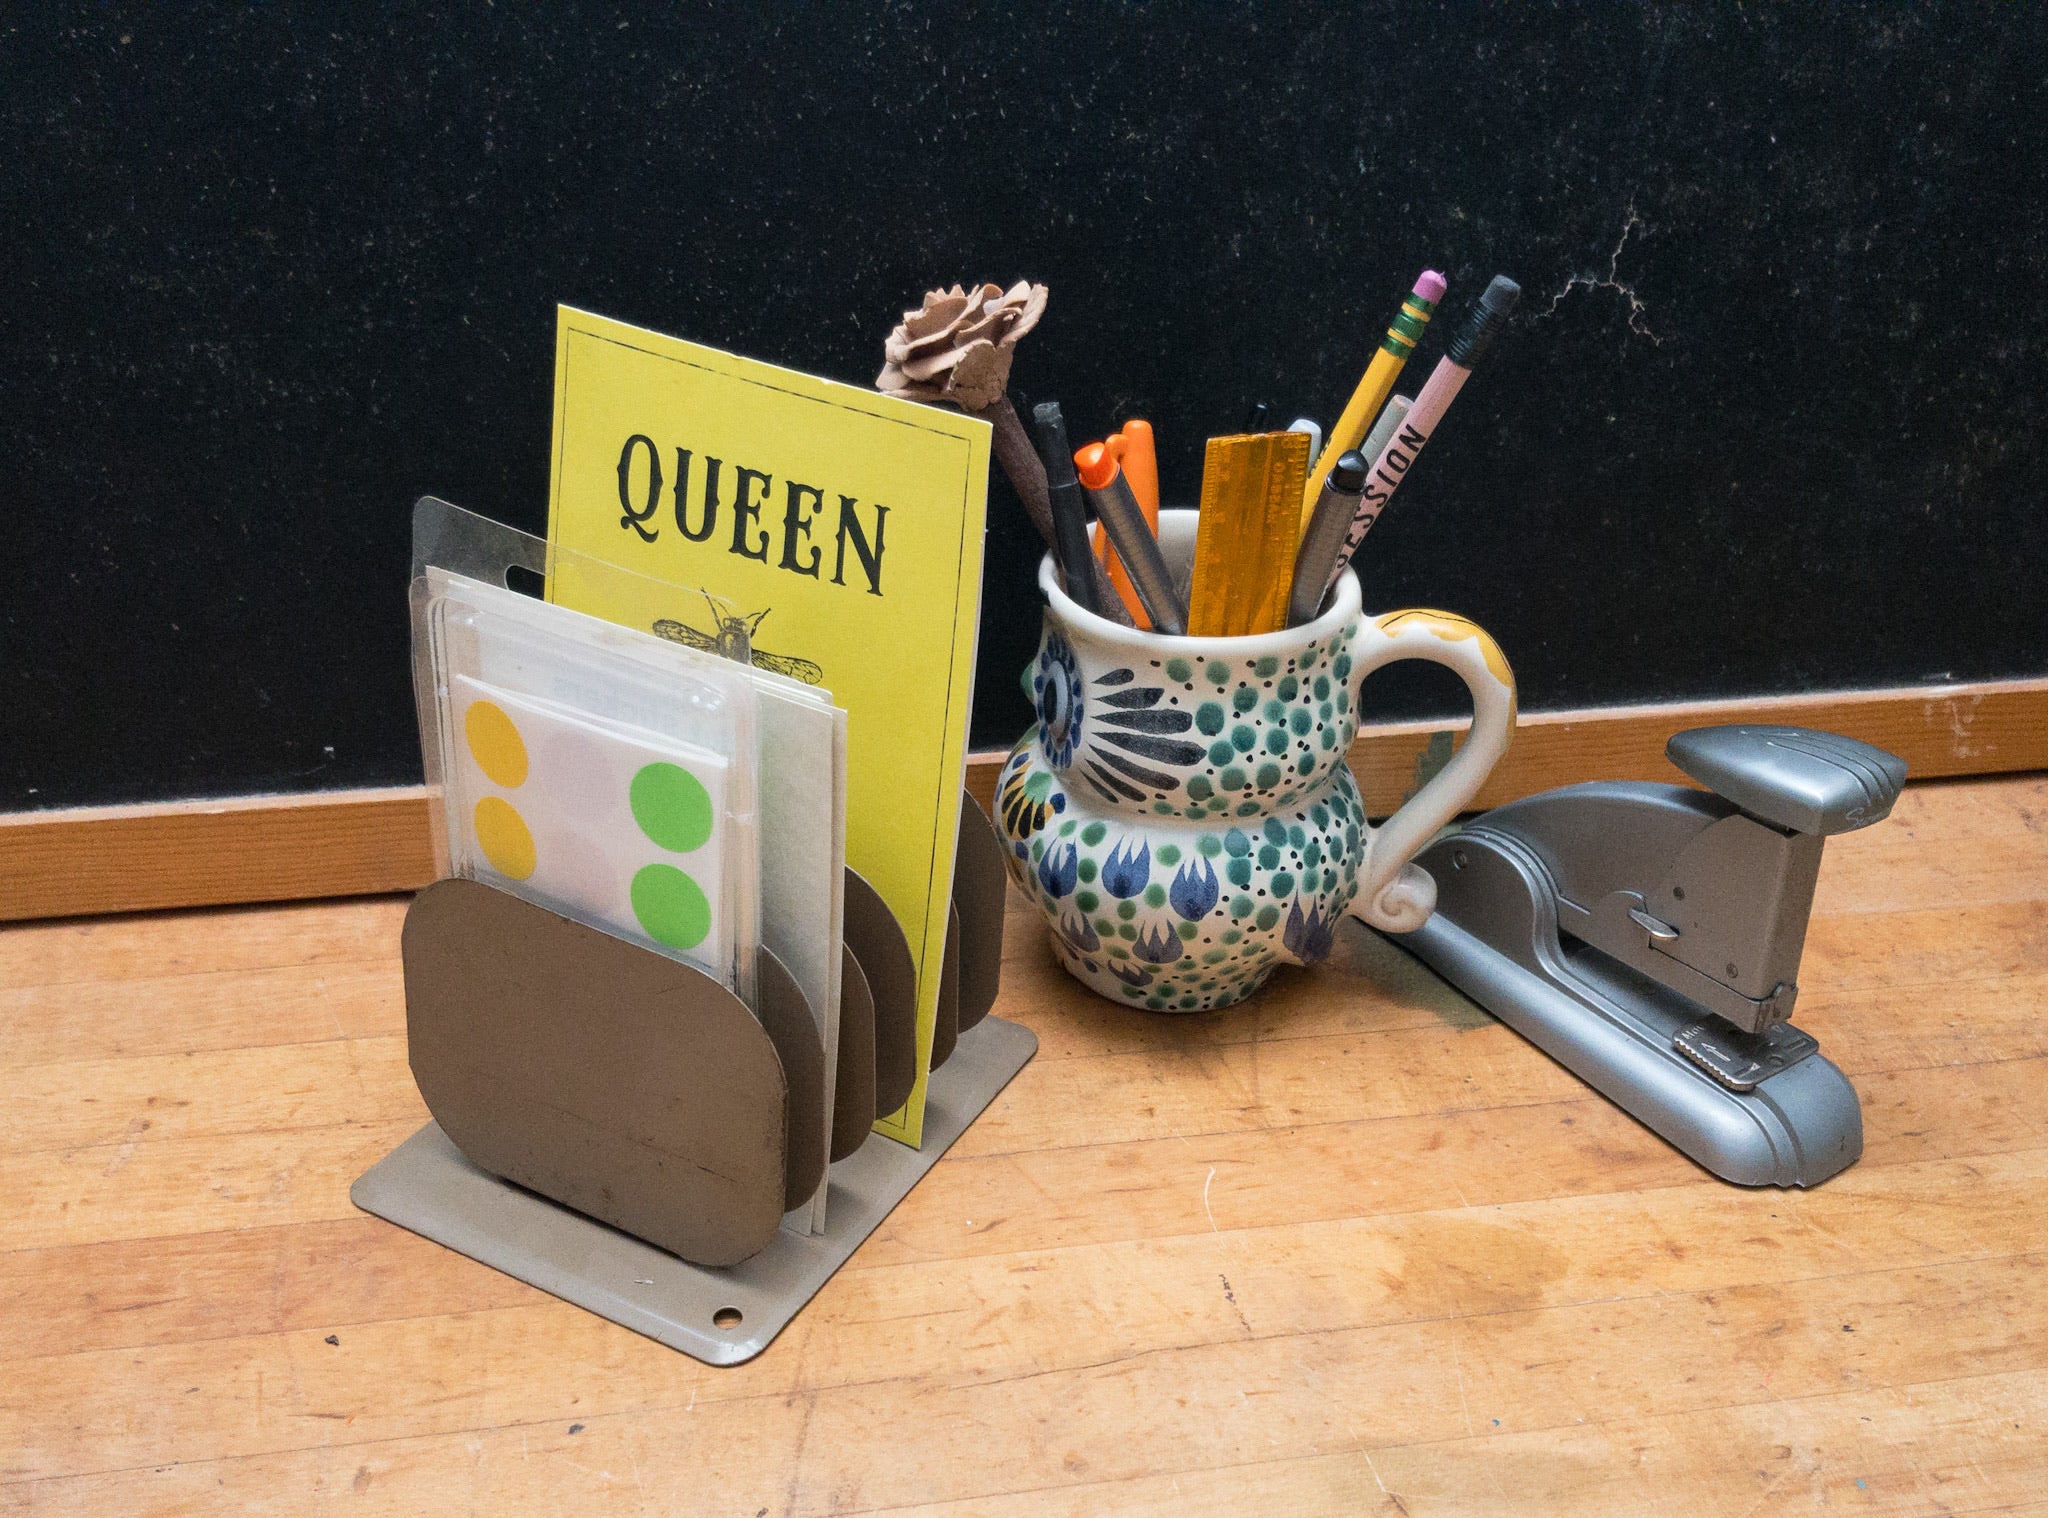 Metal paper organizer with papers and office supplies on a week desk